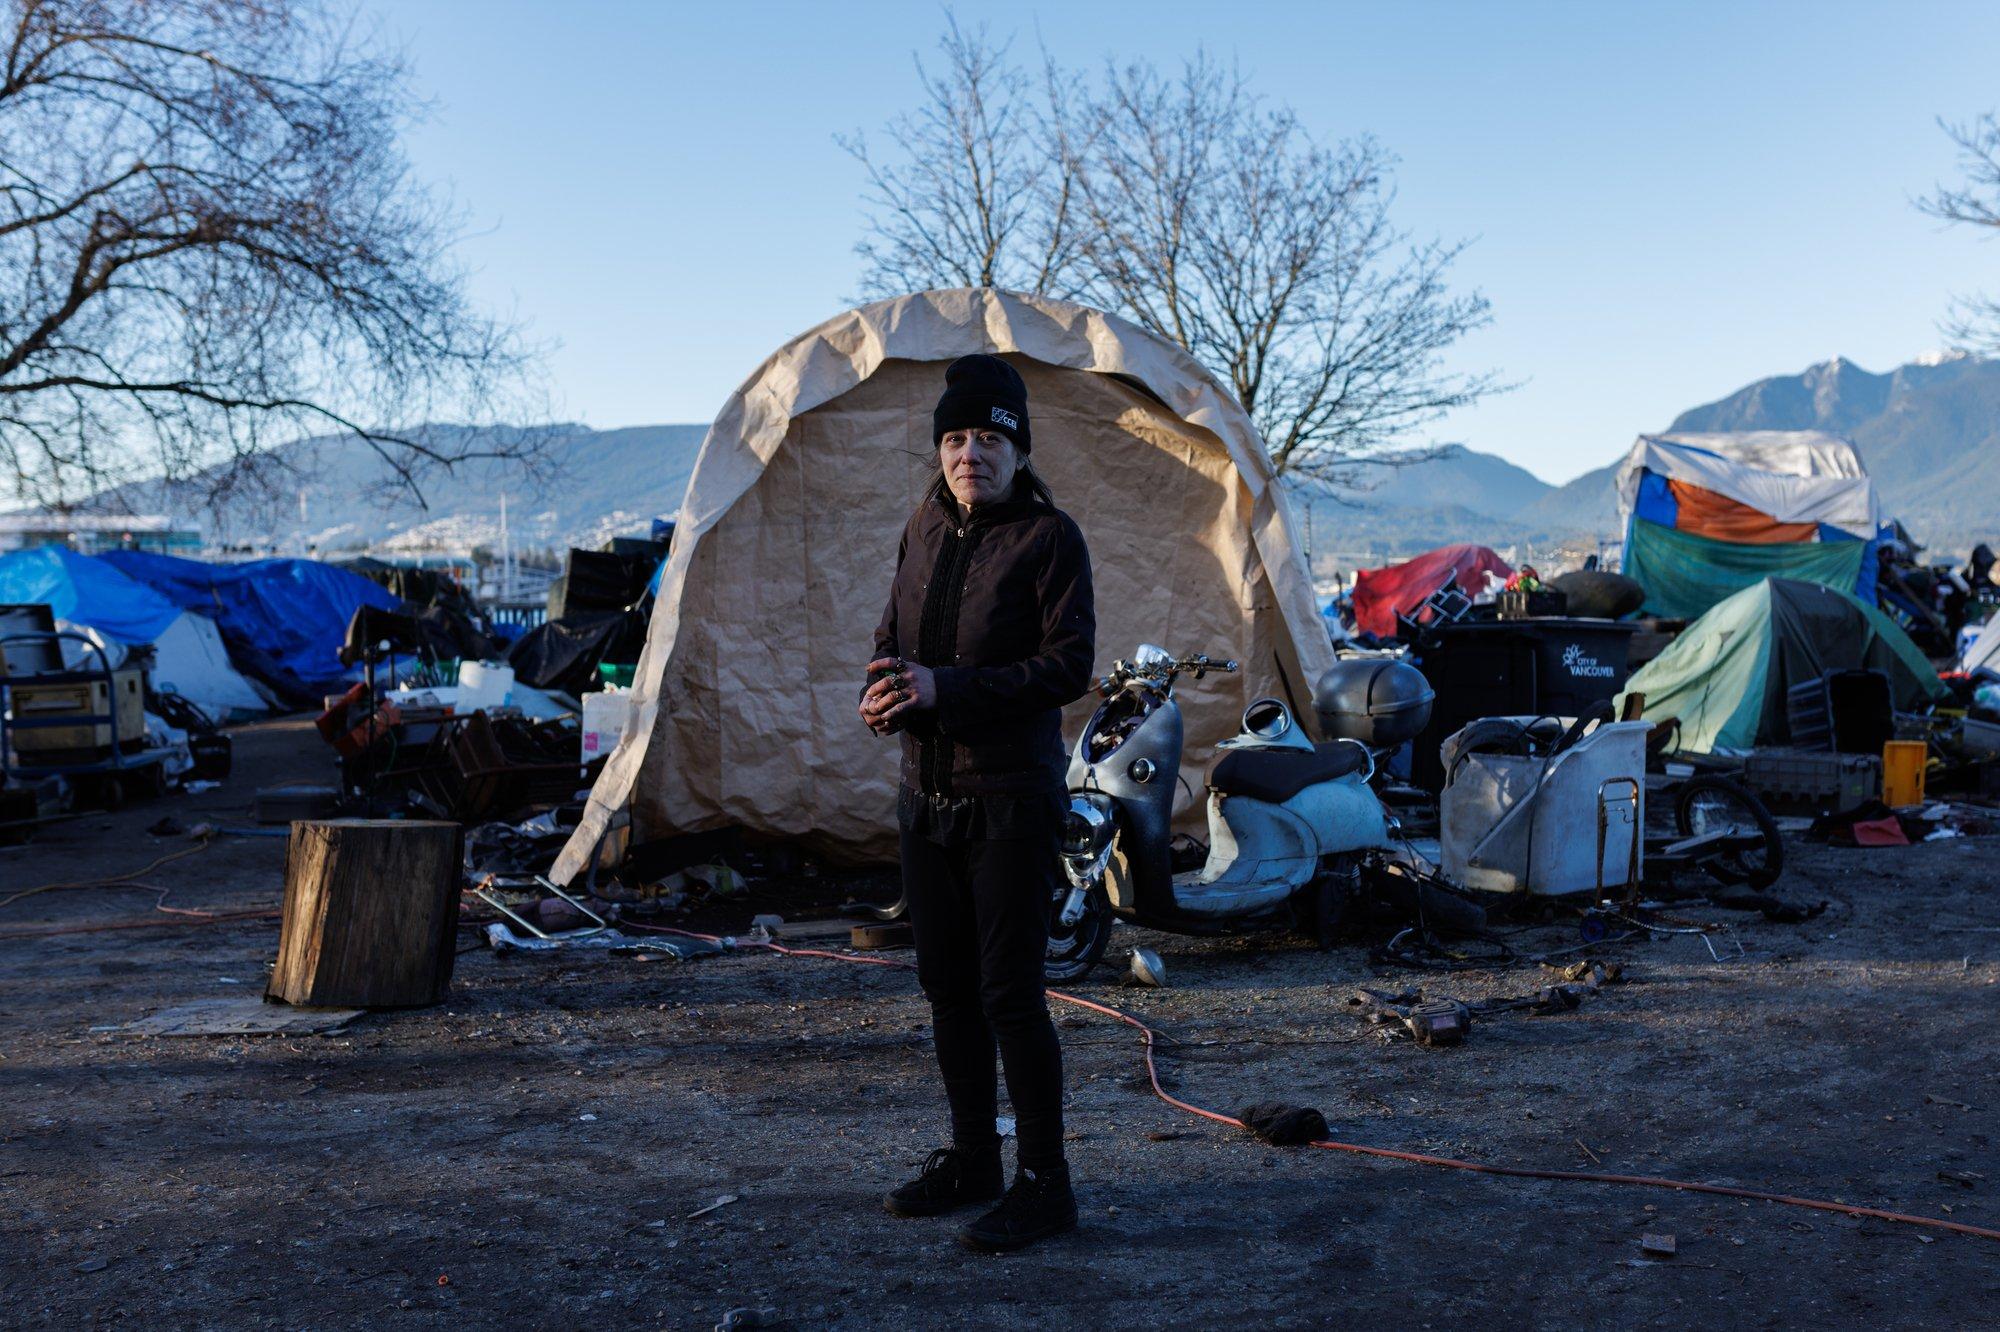 Kerry Bamberger moved out of a dangerous single-room-occupancy hotel to set up camp in CRAB Park. In 2021, she became a litigant in a judicial review that sought to overturn eviction orders against the encampment, partly on the basis that there wasnât adequate shelter elsewhere. The B.C. Supreme Court ruled in the CRAB Park residentsâ favour.